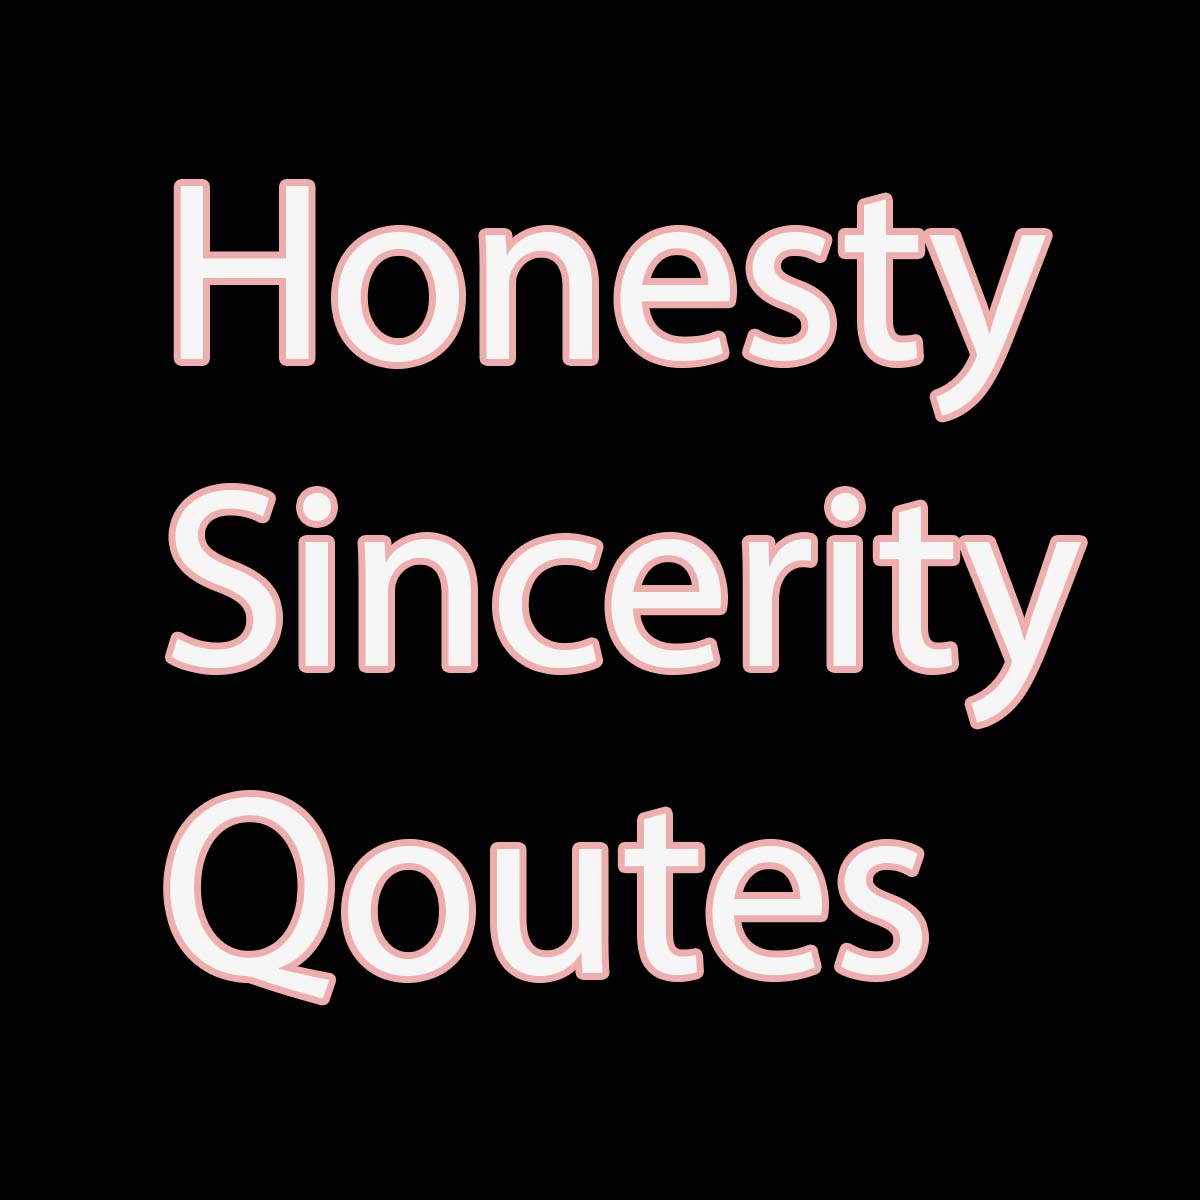 Sincerity quotes honesty quotes and sayings About Life